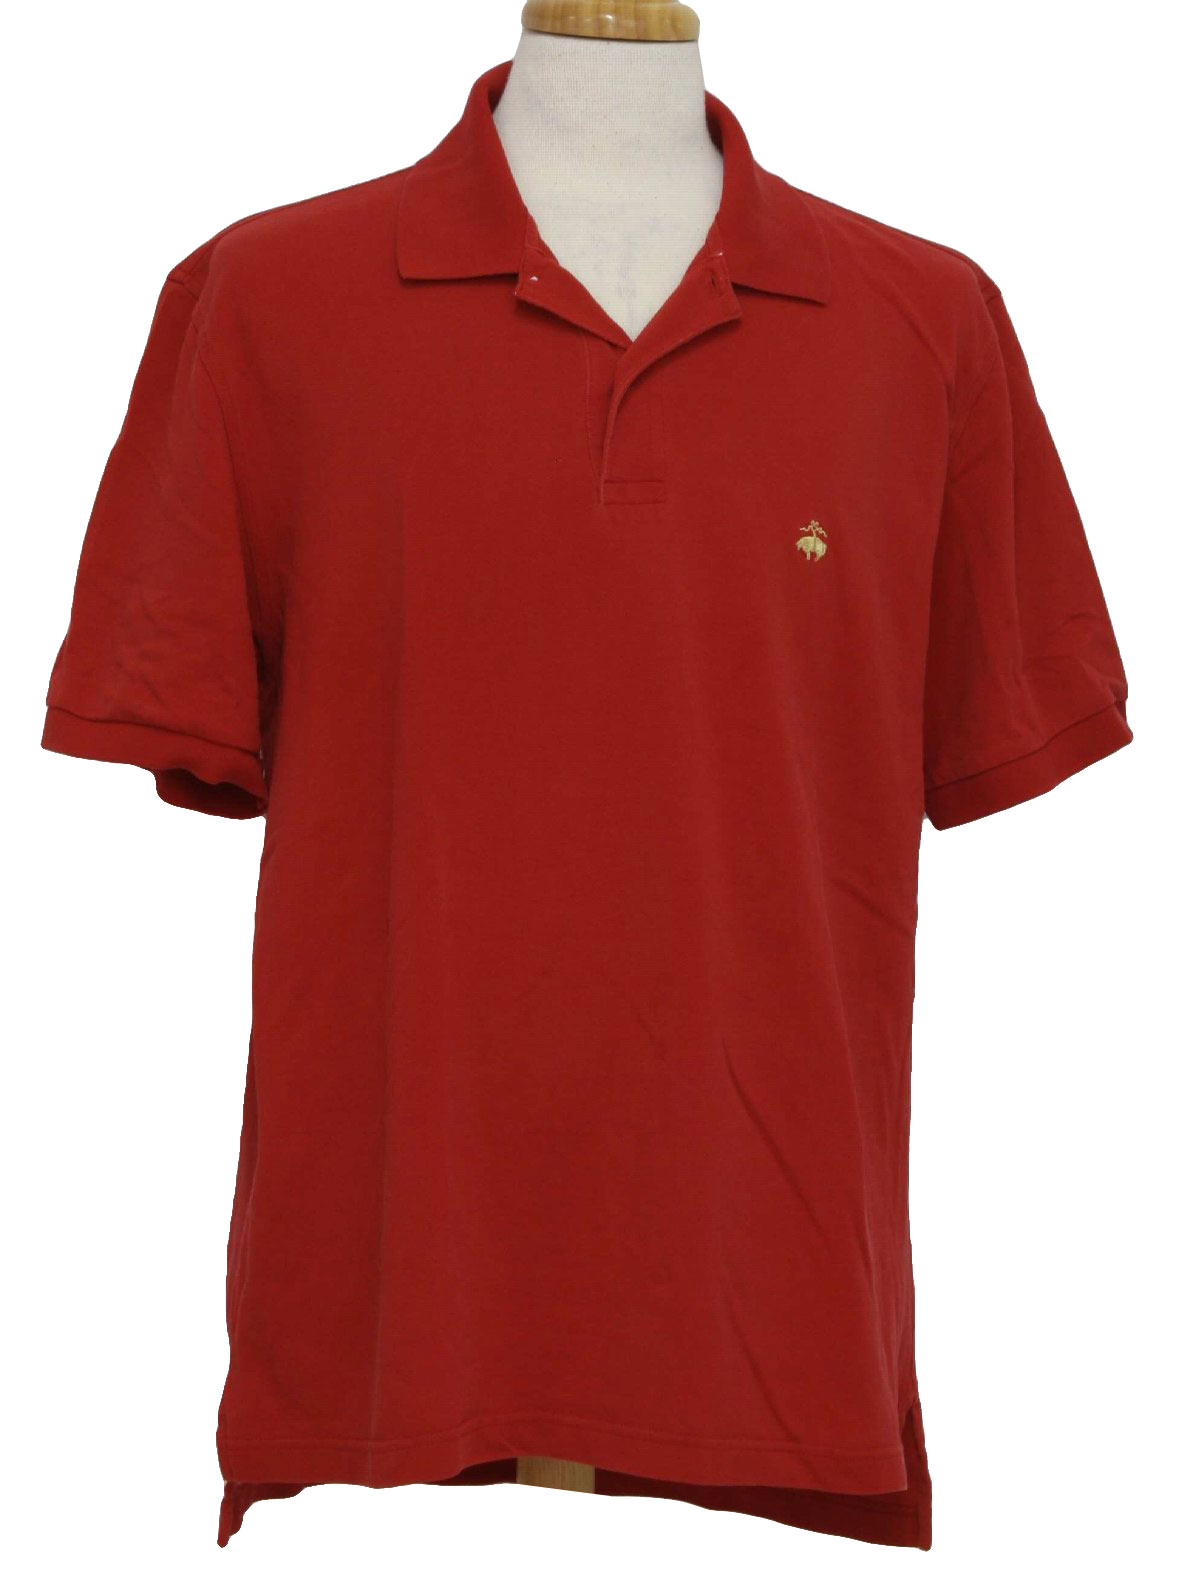 Retro 1990s Shirt: Early 90s -Brooks Brothers- Mens red waffle weave ...